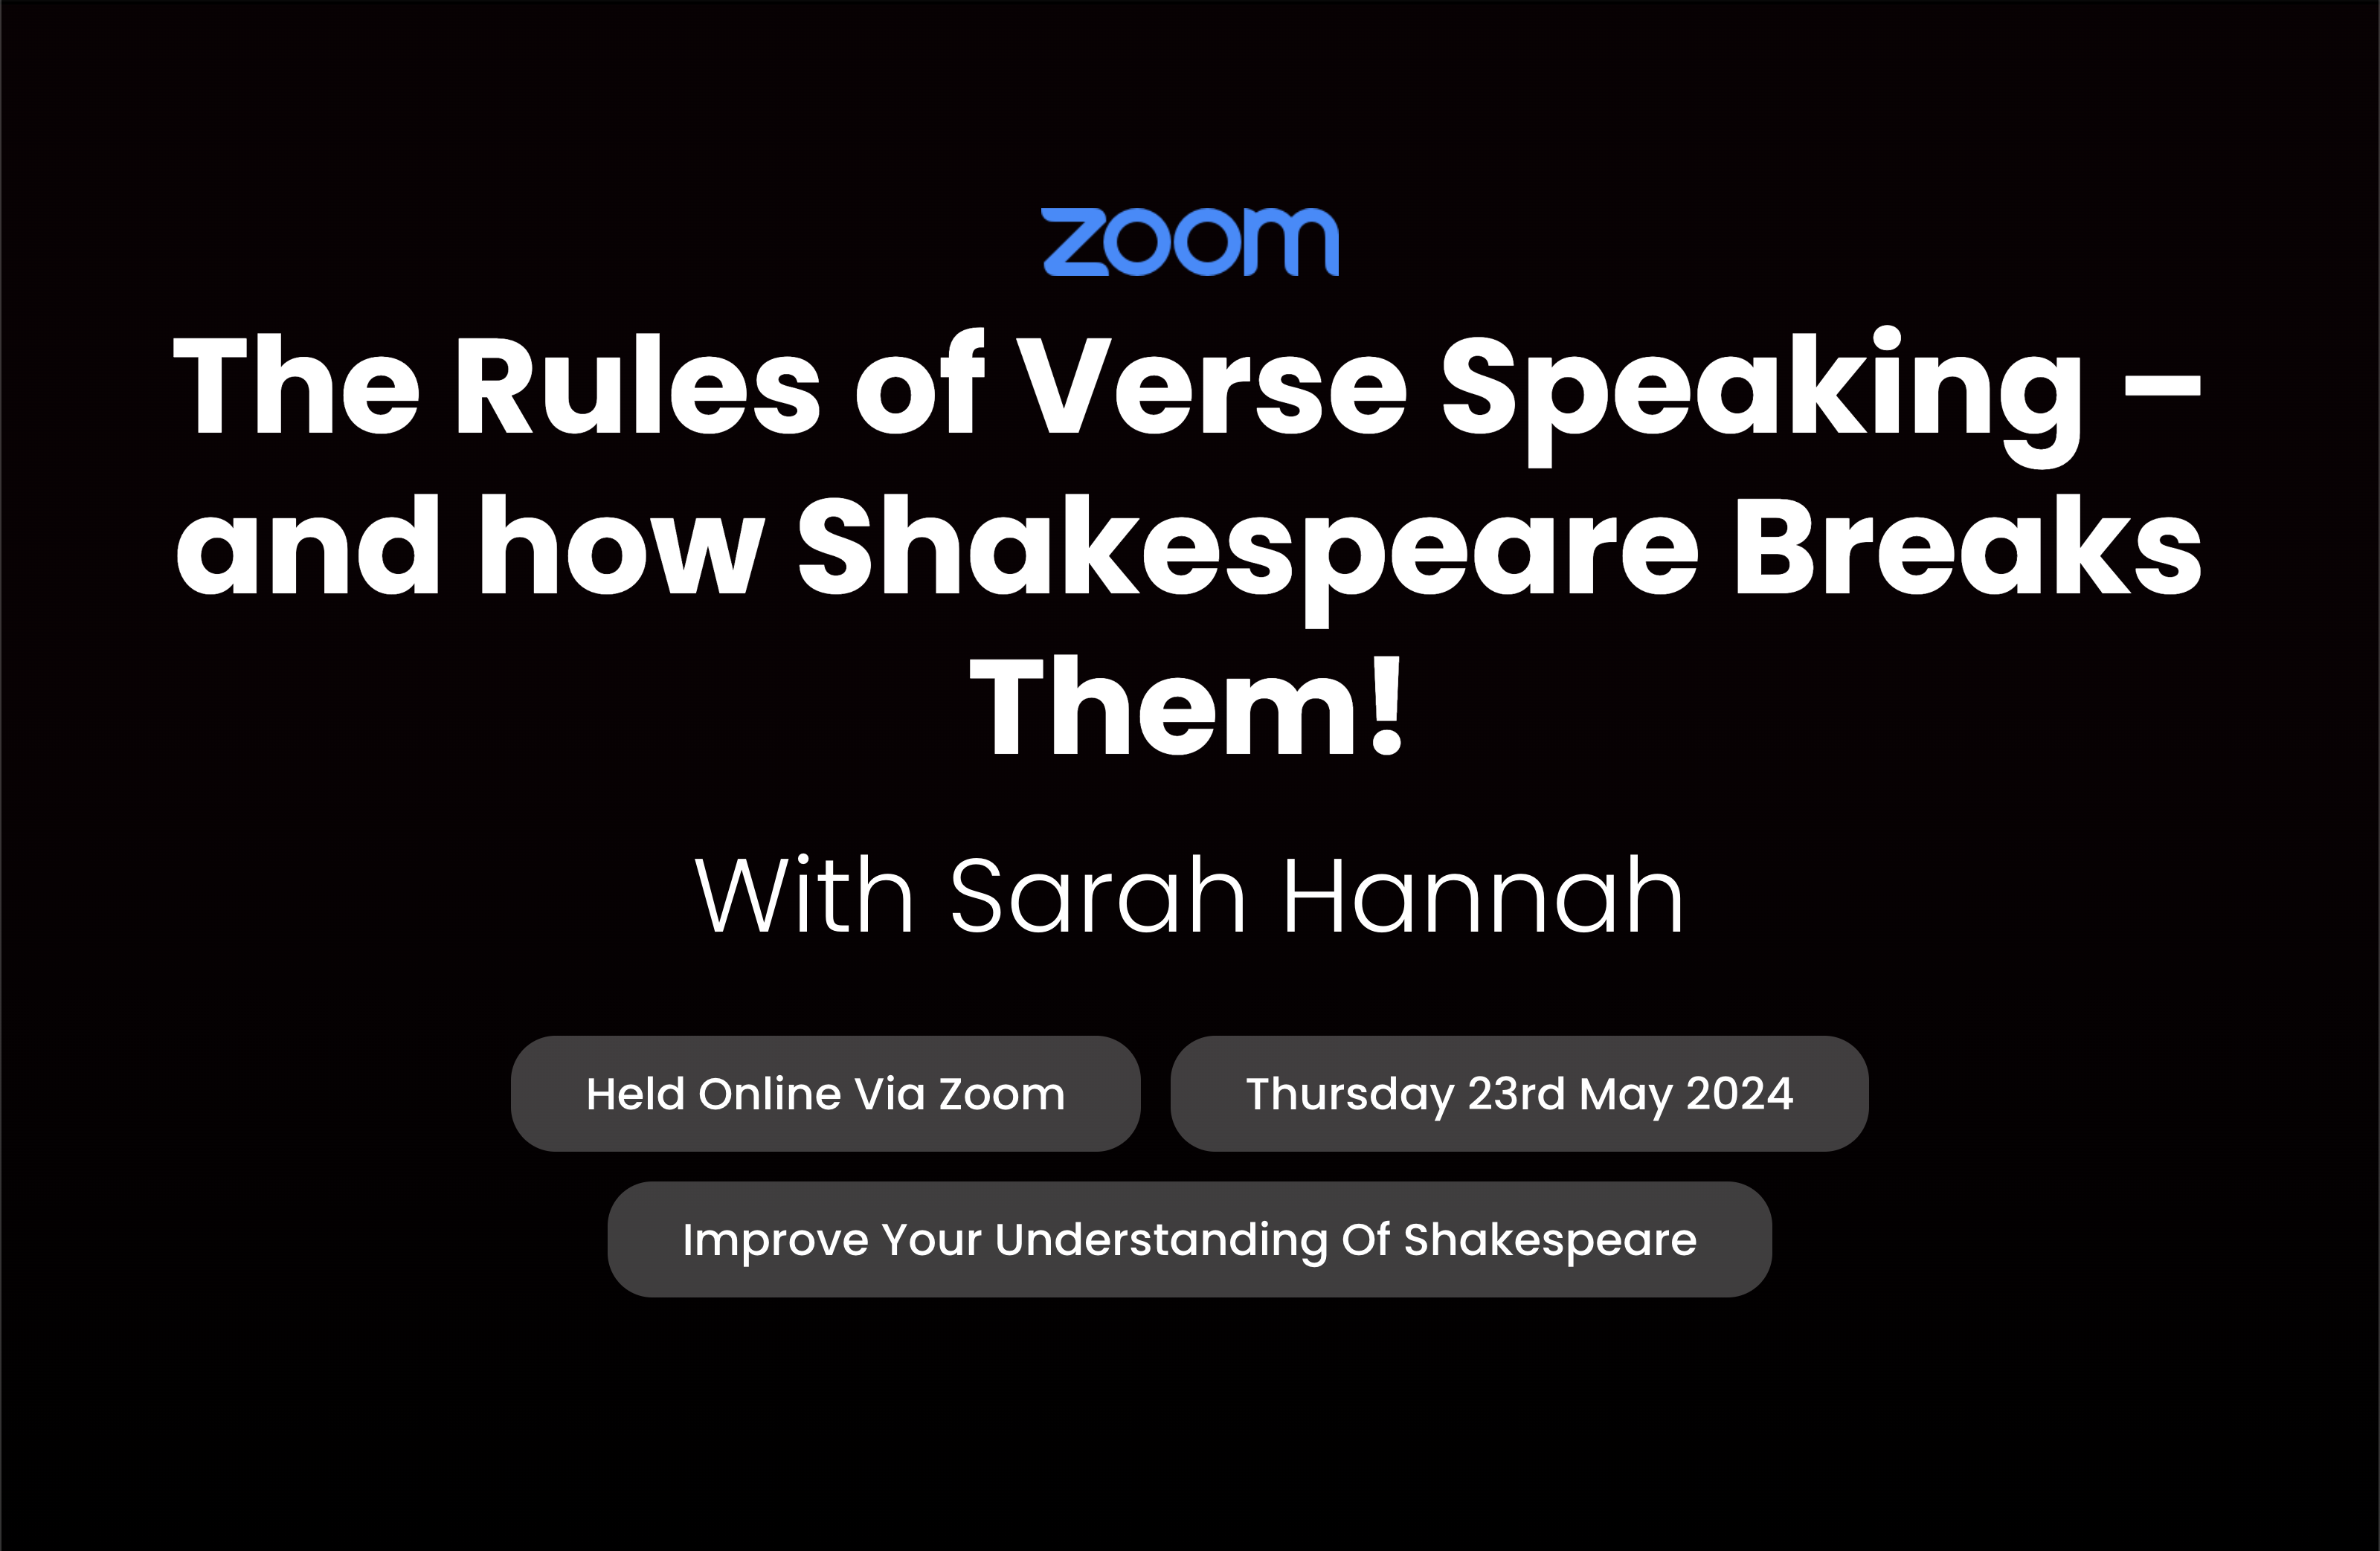 The Rules of Verse Speaking – and how Shakespeare Breaks Them!